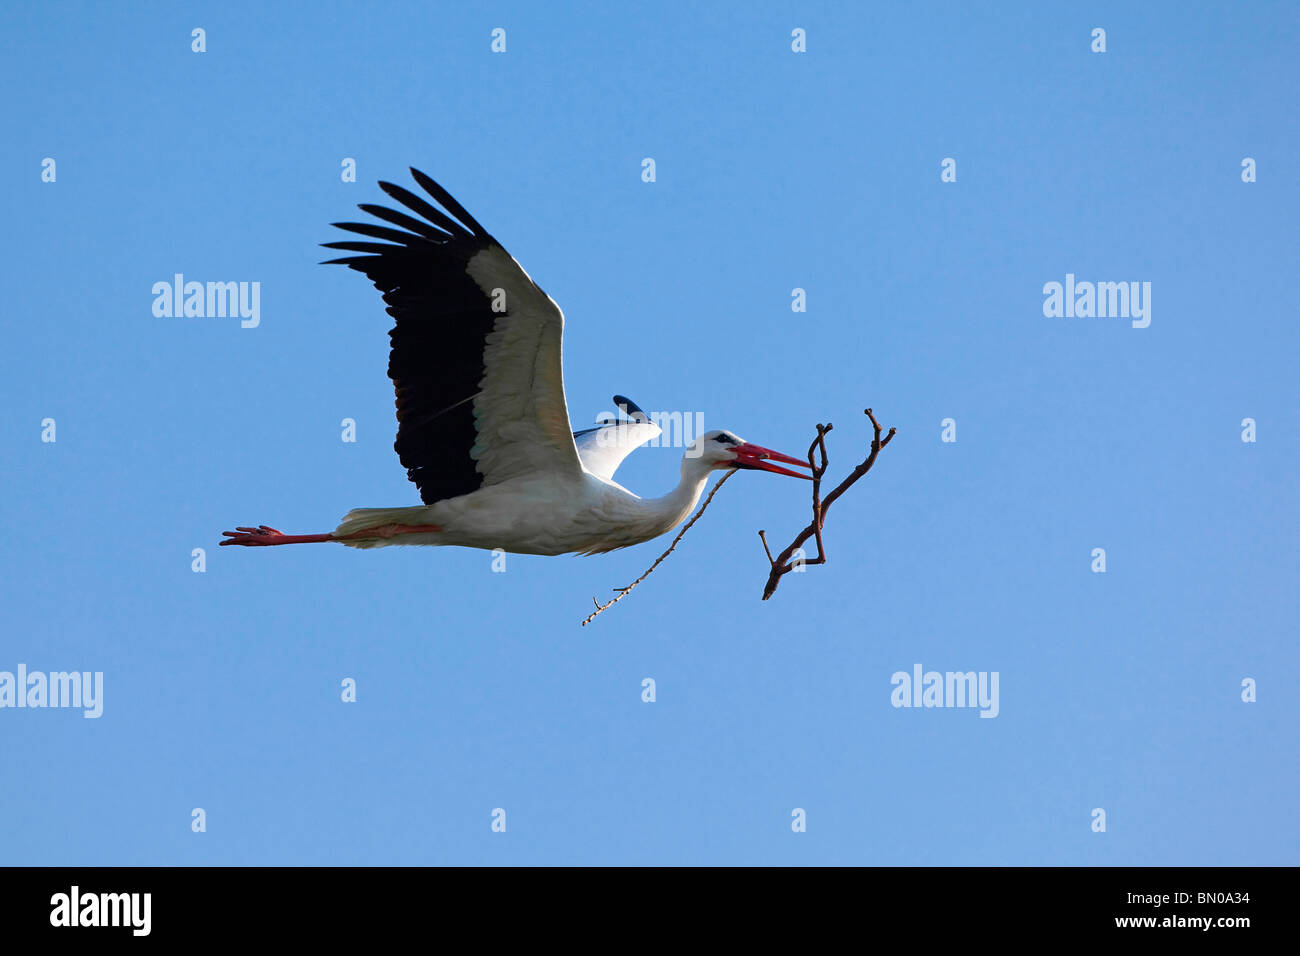 European White Stork (Ciconia ciconia), in flight with nesting material in its bill. Stock Photo